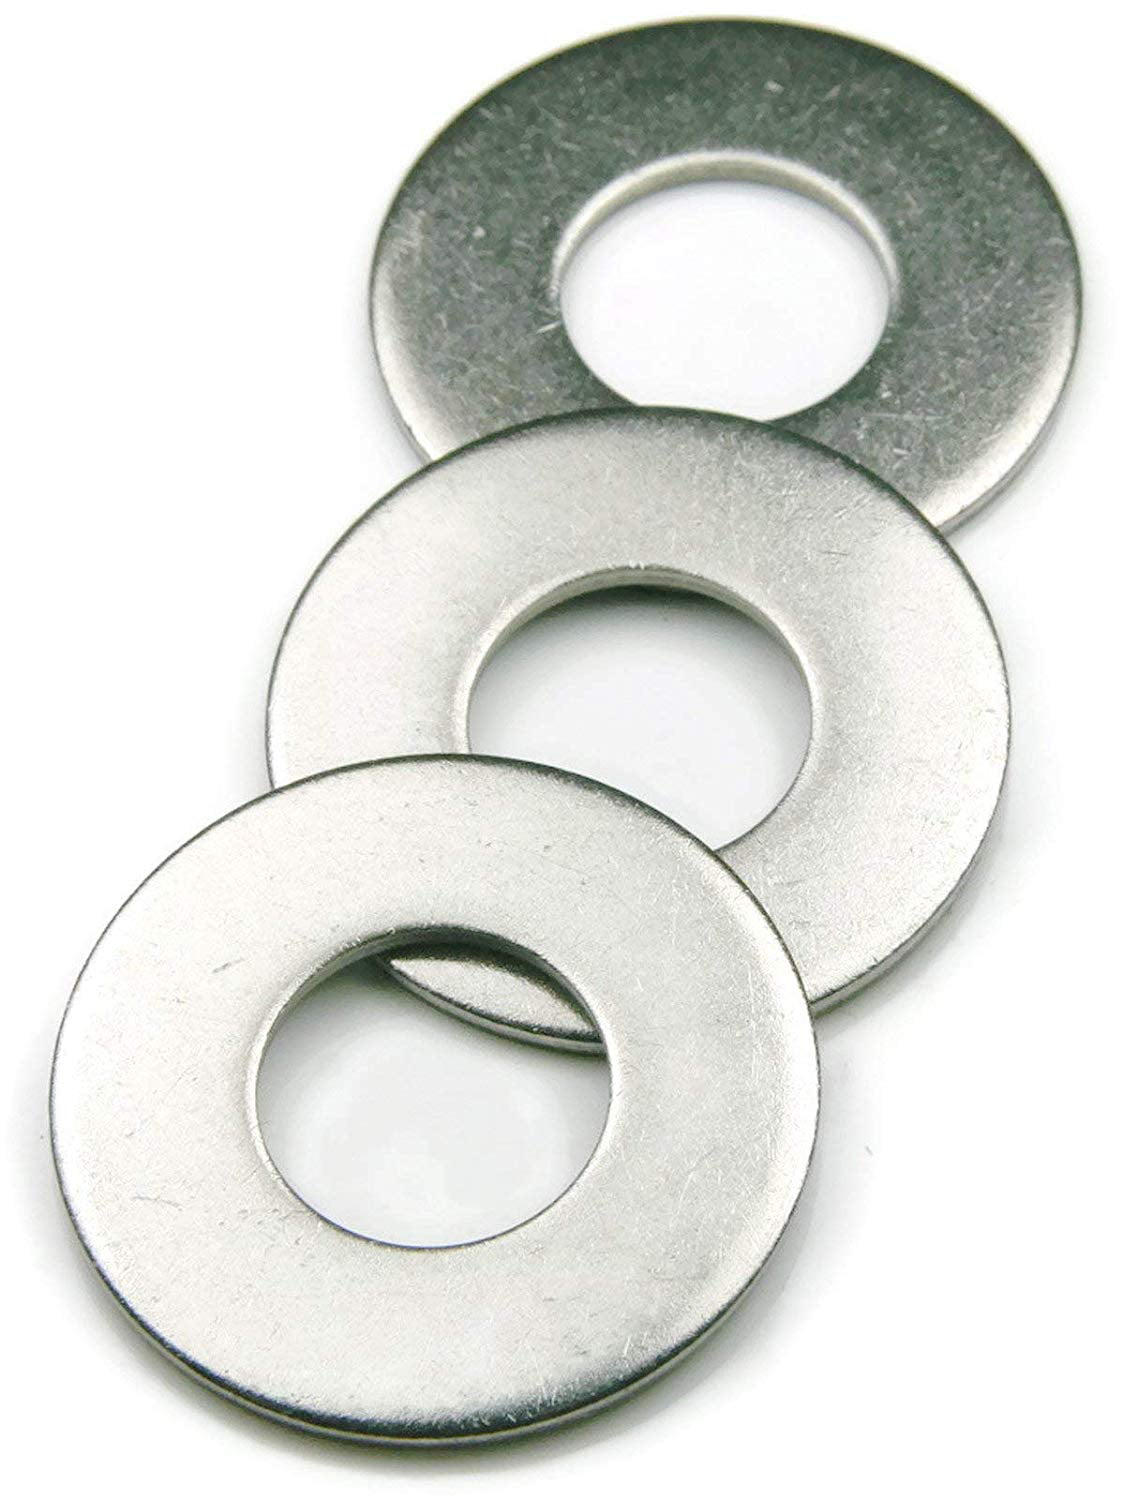 M10 Thick Washers Flat Heavy Duty Spacer A2 Stainless Steel Metric Sizes M3 